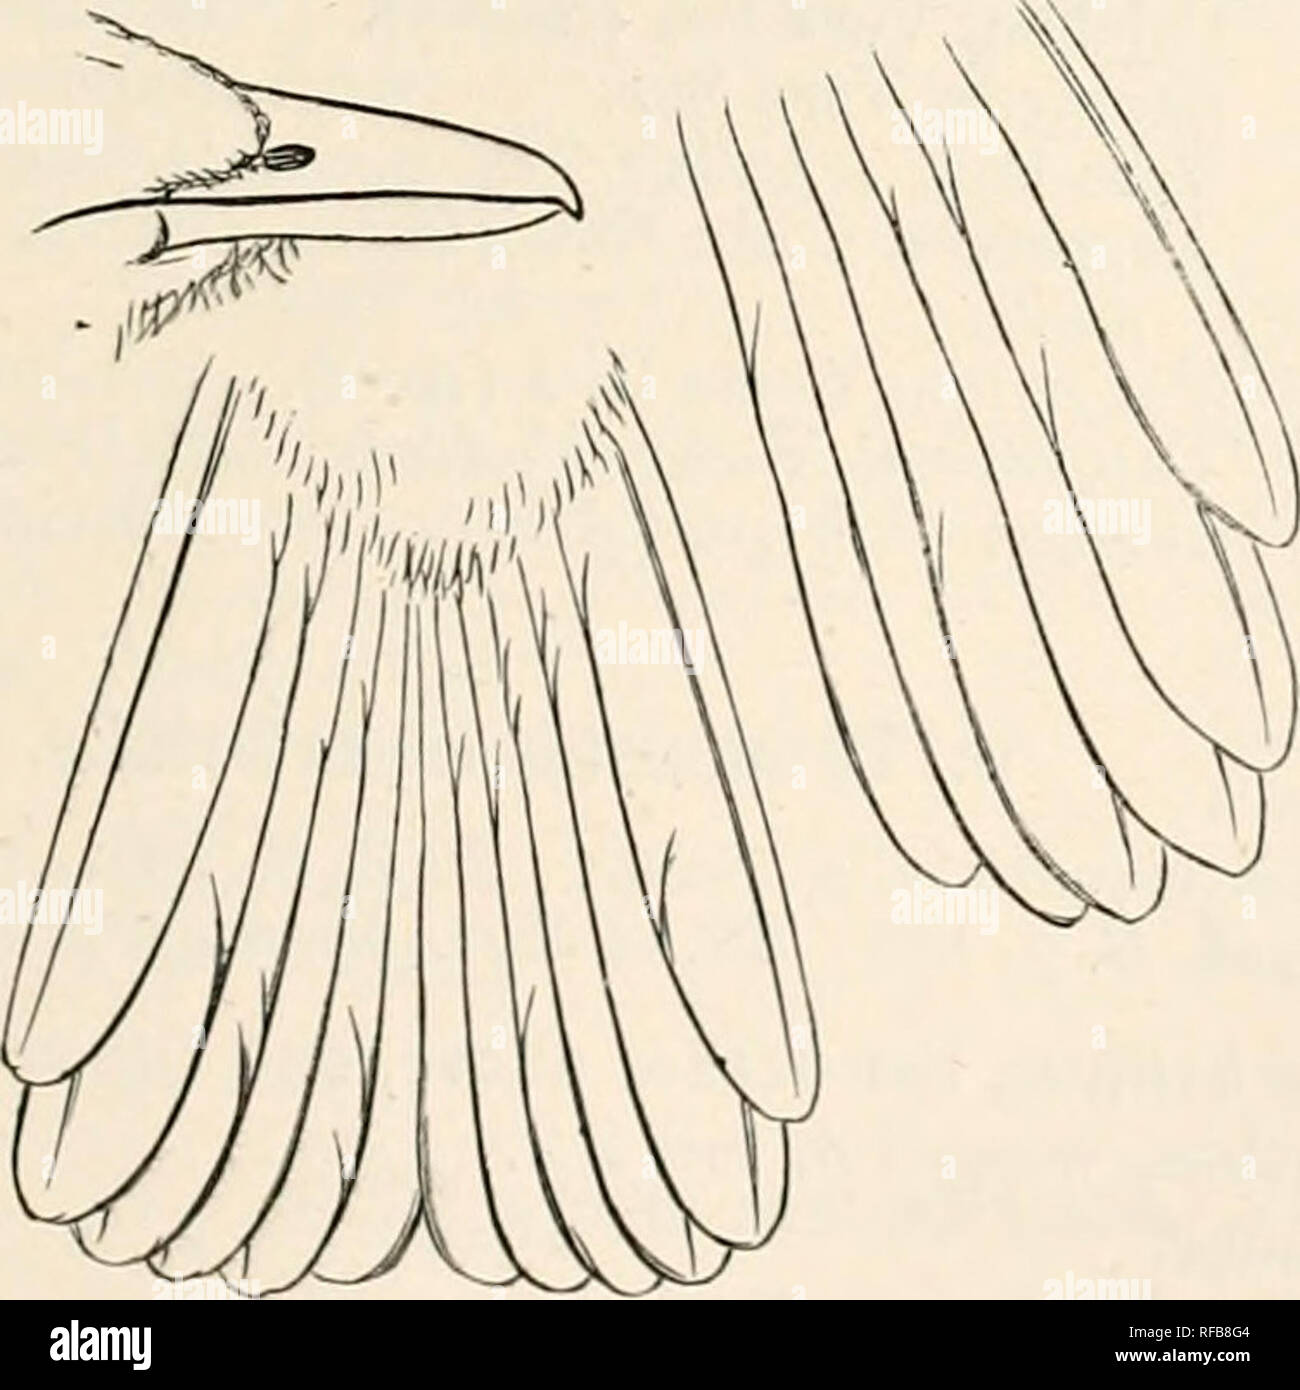 . Catalogue of the Birds in the British Museum. Head of Biatas nigropectus. Above reddish brown; cap black, encircled by a narrow nuchal band of buffy white; wing-coverts, margins of remiges, and tail clear rufous: beneath brown; chin white; large pectoral shield black: whole length 6-8 inches, wing 3-2, tail 3. Female similar but head chestnut-brown and without the pectoral patch * Hah. S.E. Brazil. a. (S ad. st. b. S ad. sk. c. (S ad. sk. Brazil. Brazil. South America. Purchased. Salvin-Godman Coll. Sclater CoU. 5. THAMNISTES.t Thamnistes, Scl. et Salv. P. Z. S. 1860, p. 299 Type. T. anabati Stock Photo